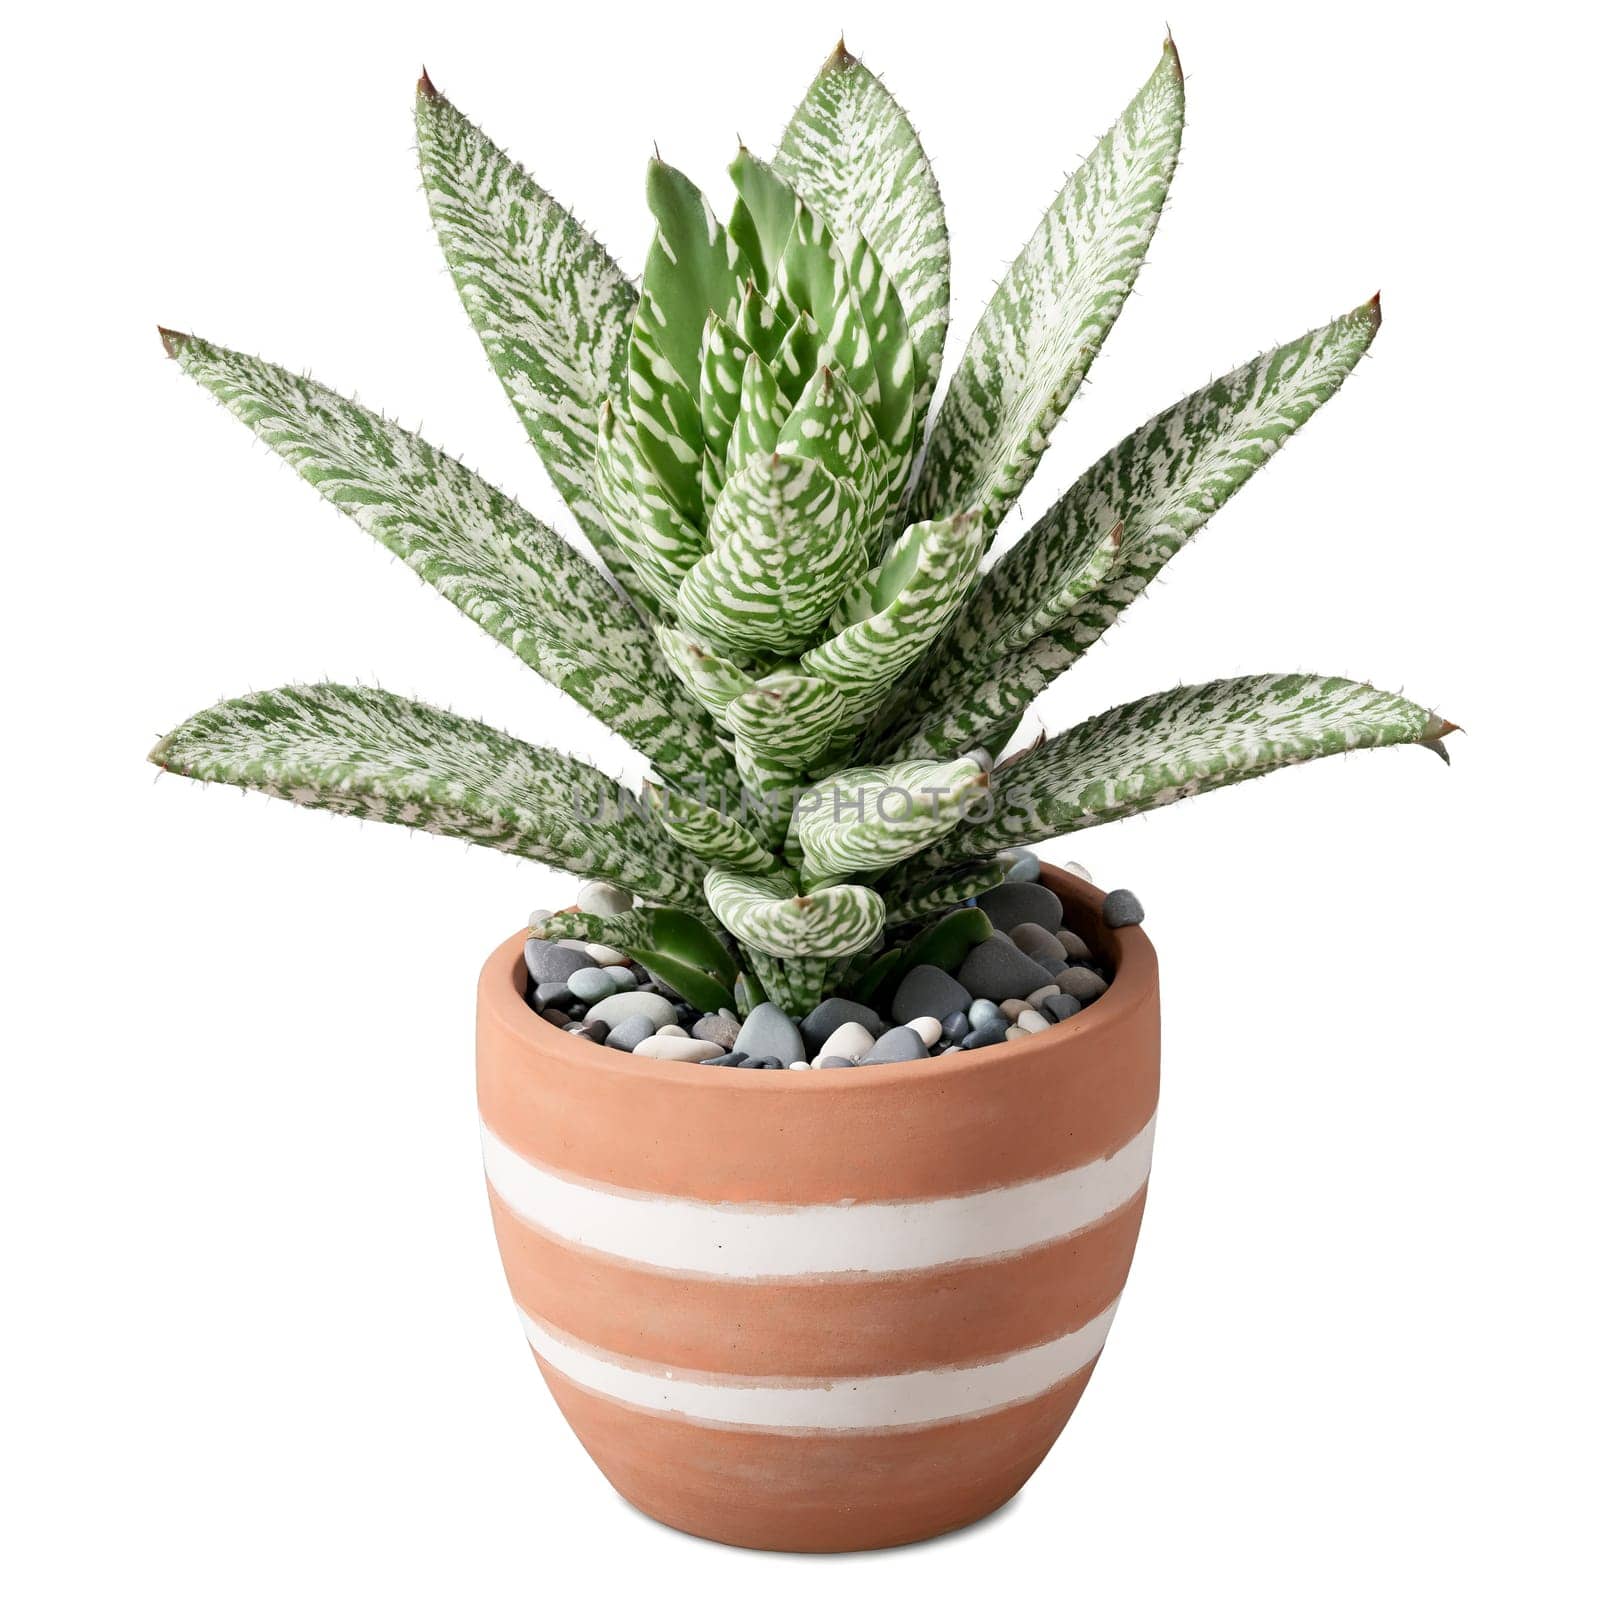 Zebra Plant thick succulent leaves with white stripes in a small terracotta pot with pebbles by panophotograph